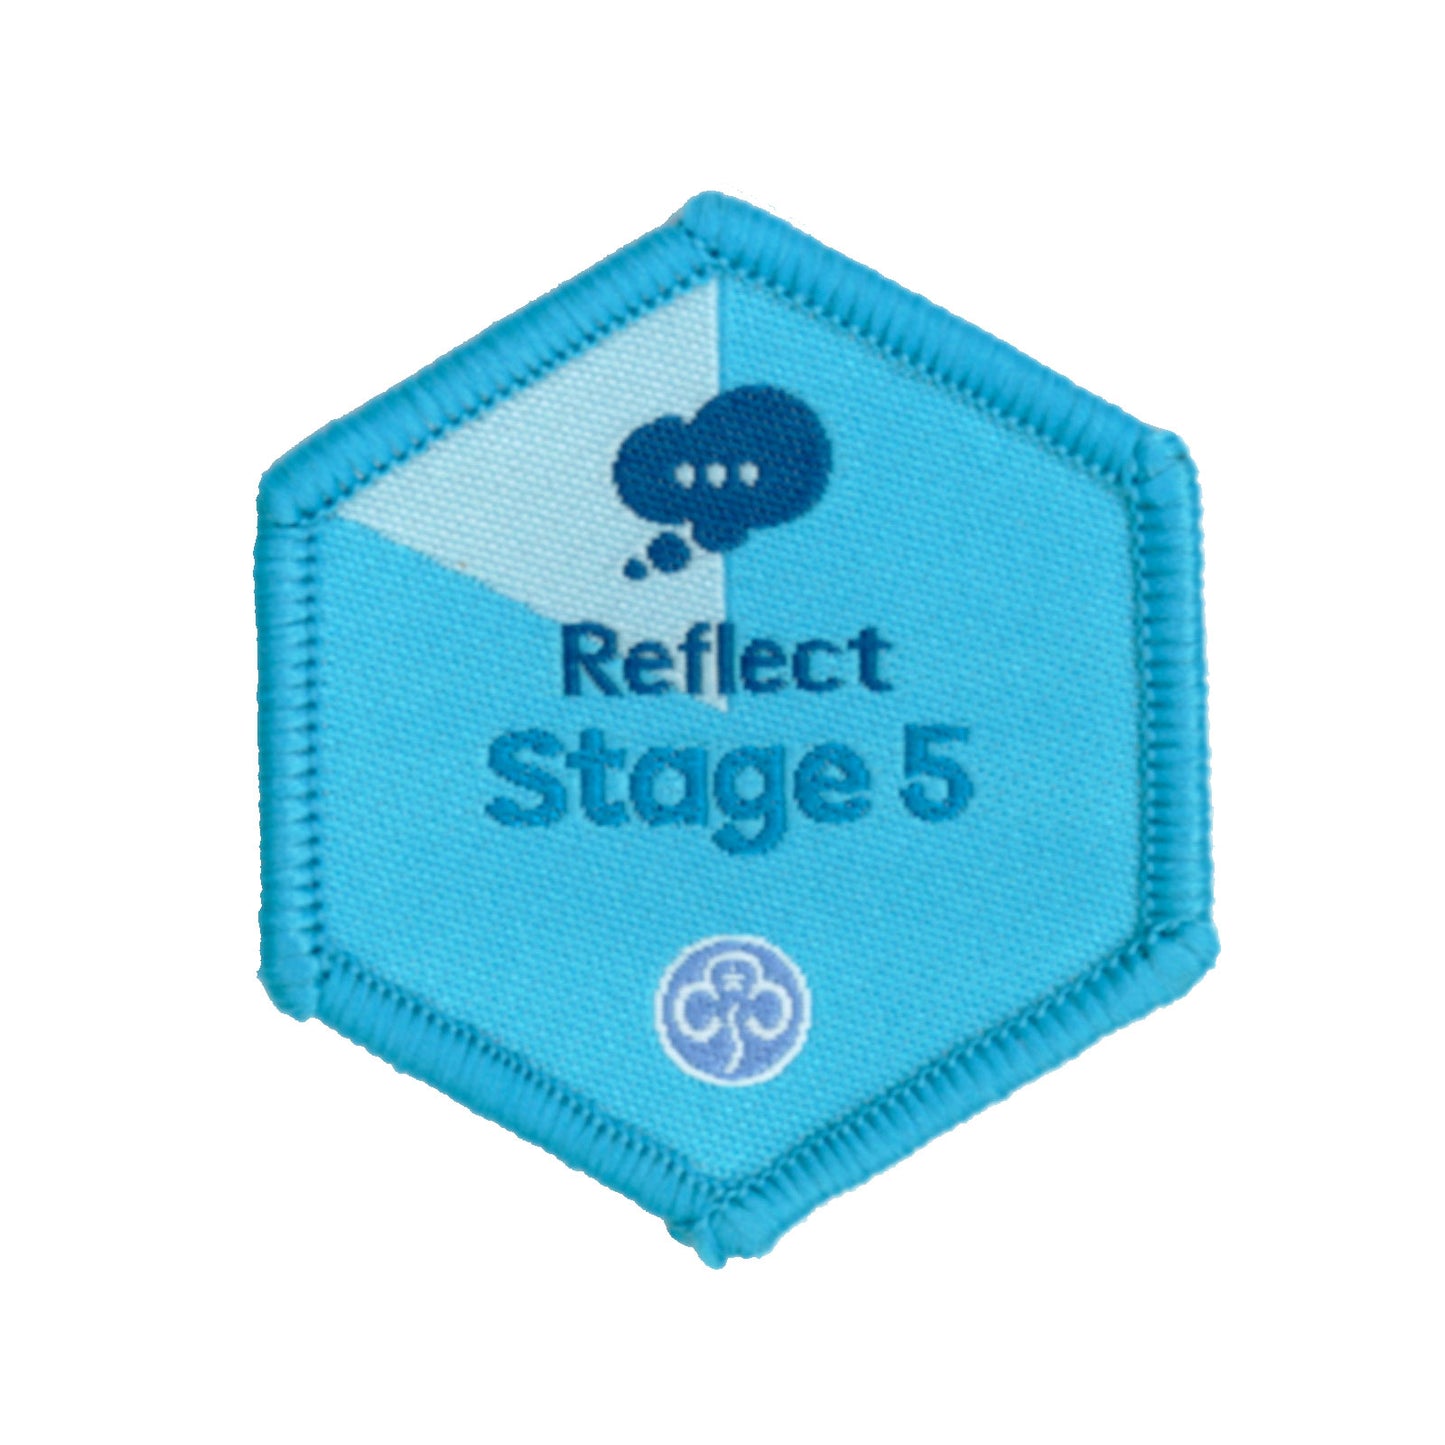 Skills Builder- Know Myself - Reflect Stage 5 Woven Badge